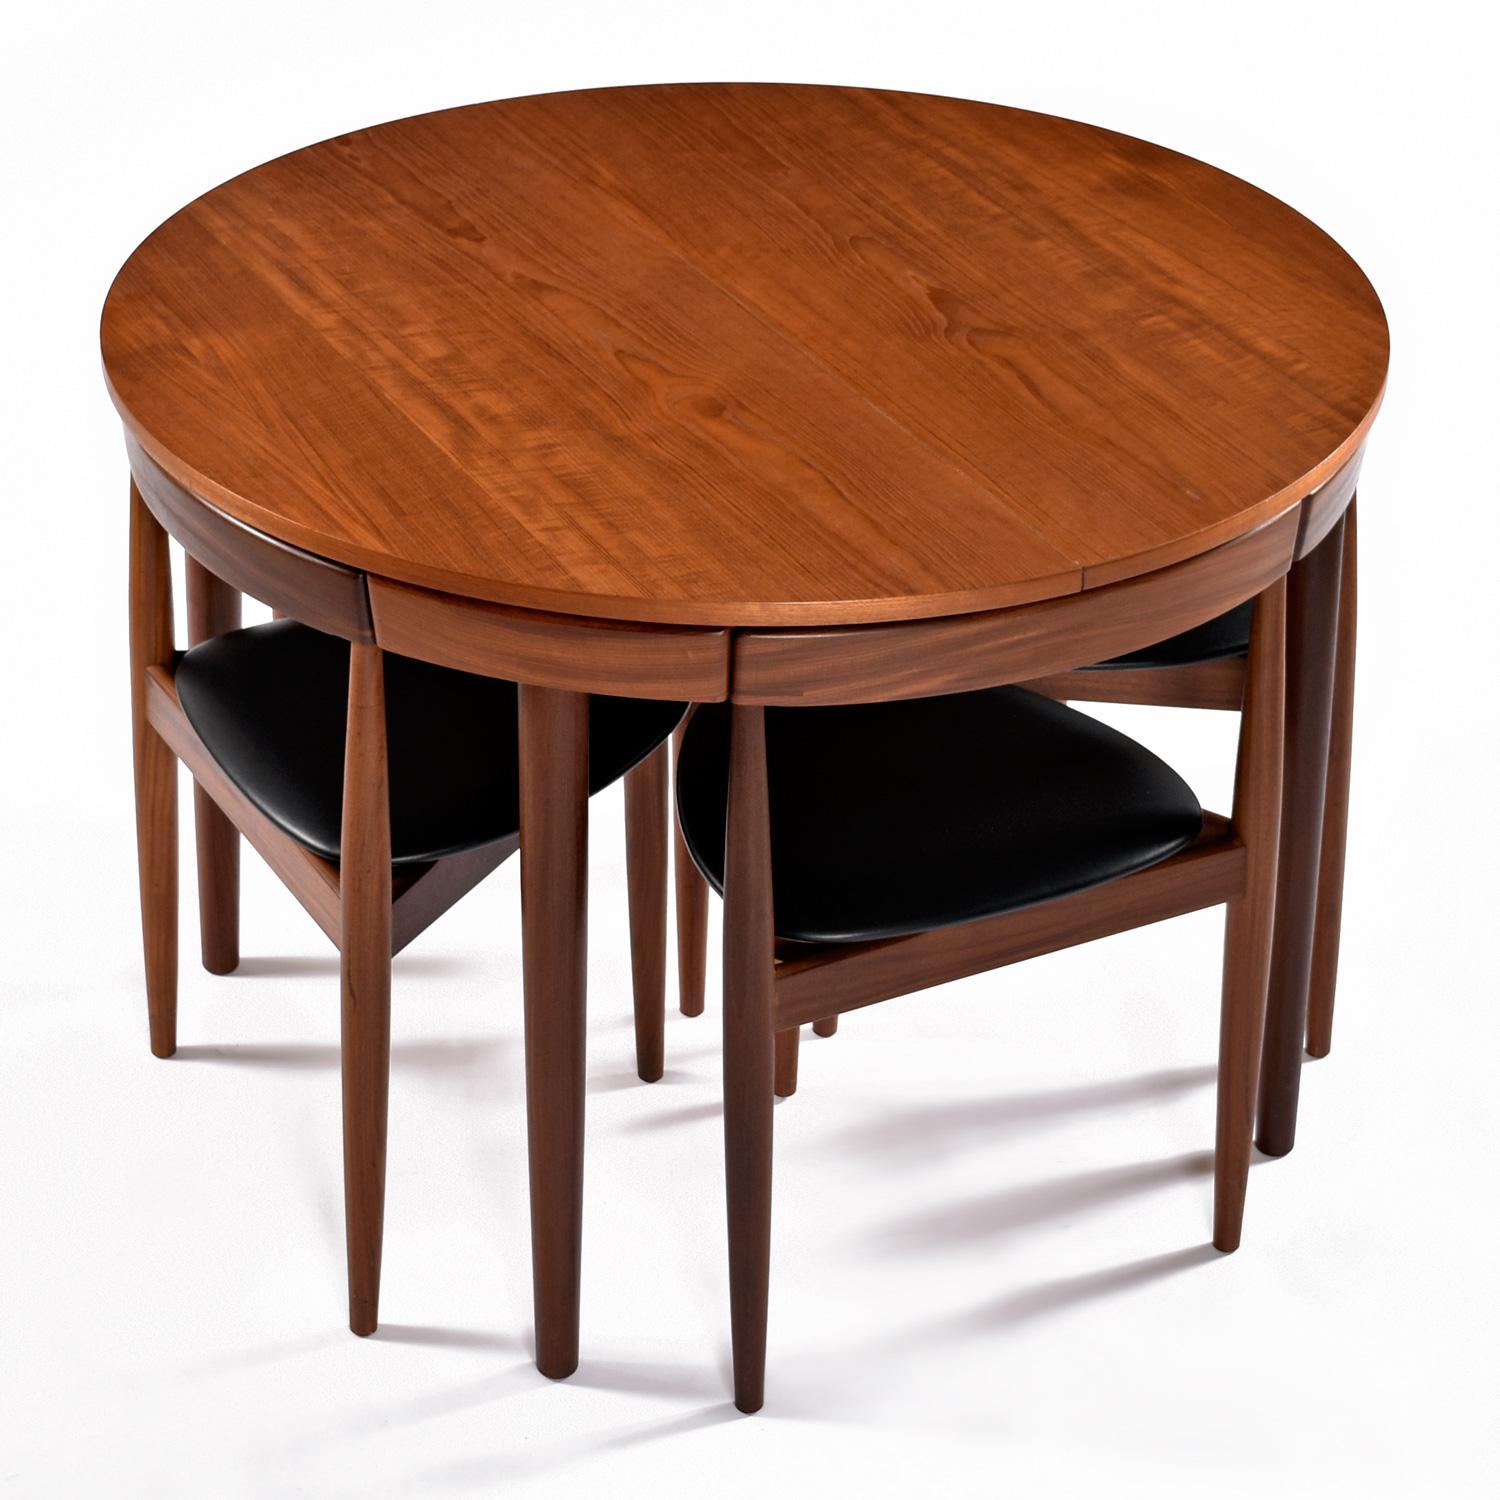 Mid-Century Modern Hans Olsen for Frem Rojle Roundette Butterfly Leaf Dining Table and '6' Chairs